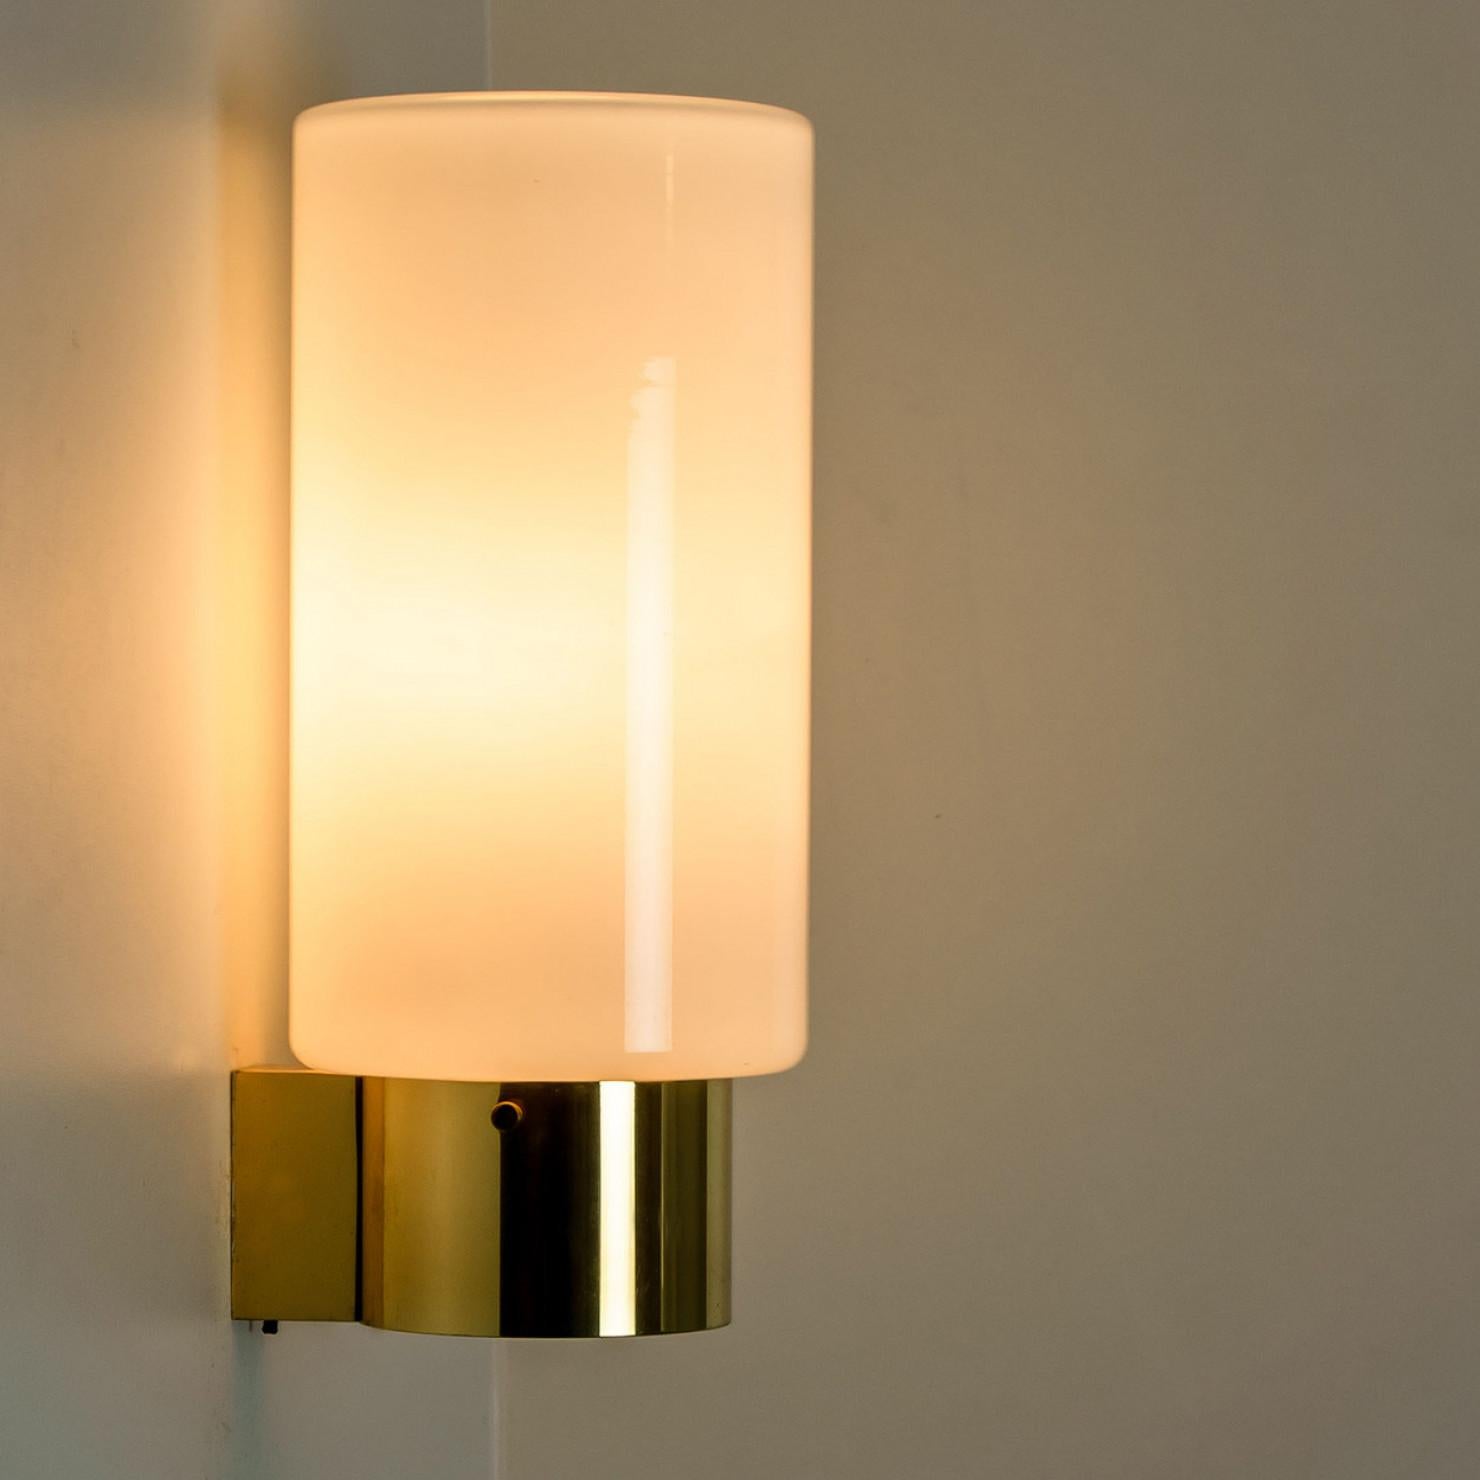 White Opaque Glass and Brass Wall Lights by Limburg, Germany, 1970s For Sale 1